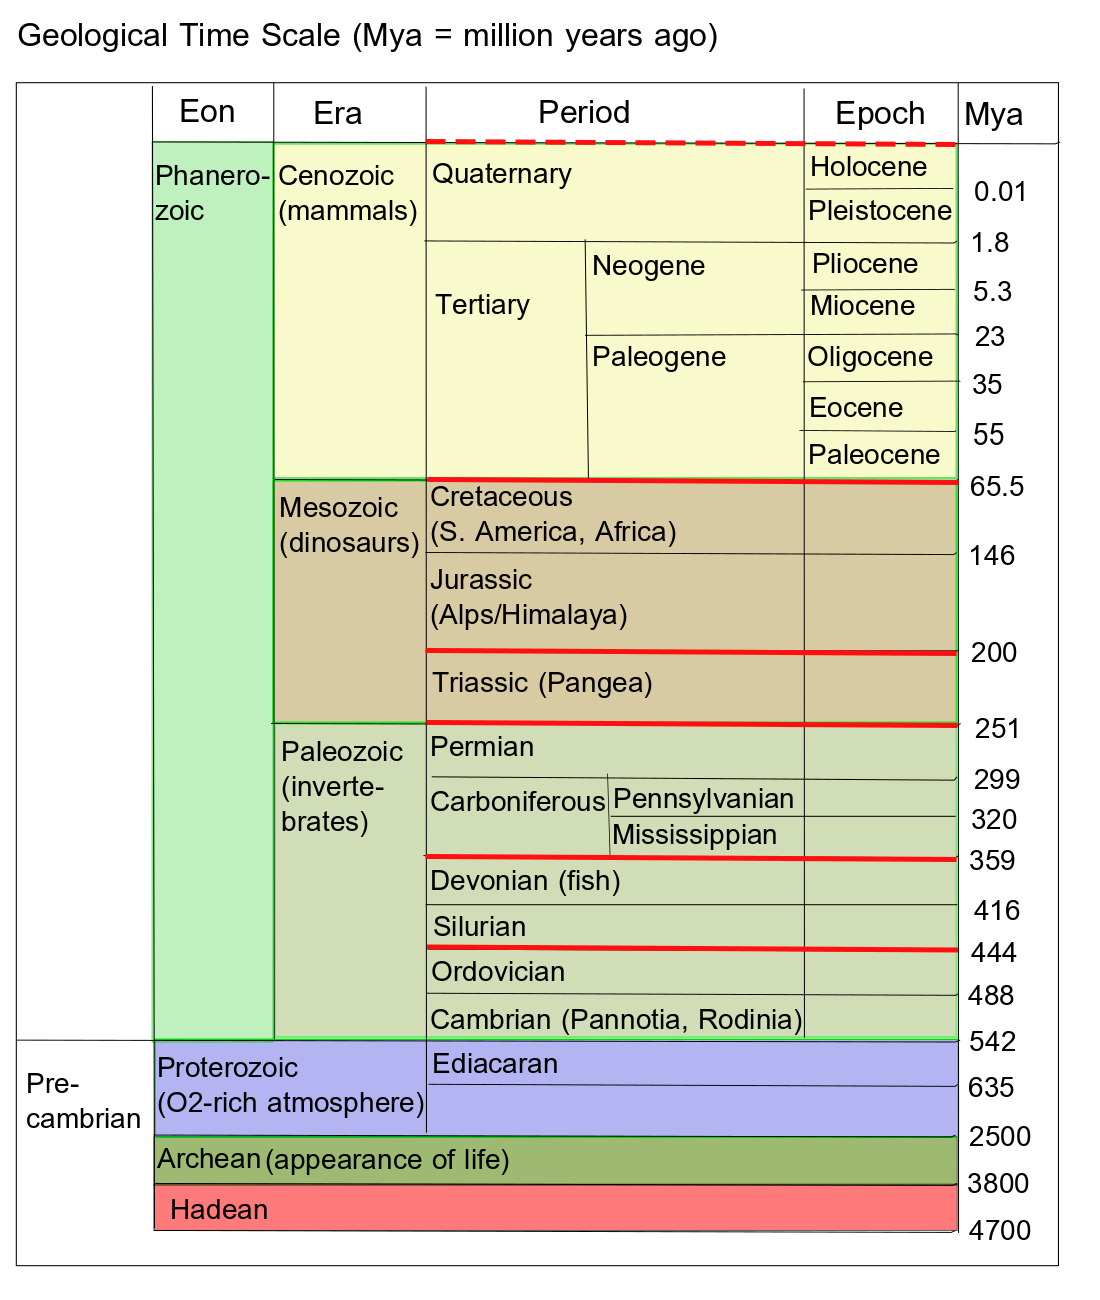 Geological time scale, by author